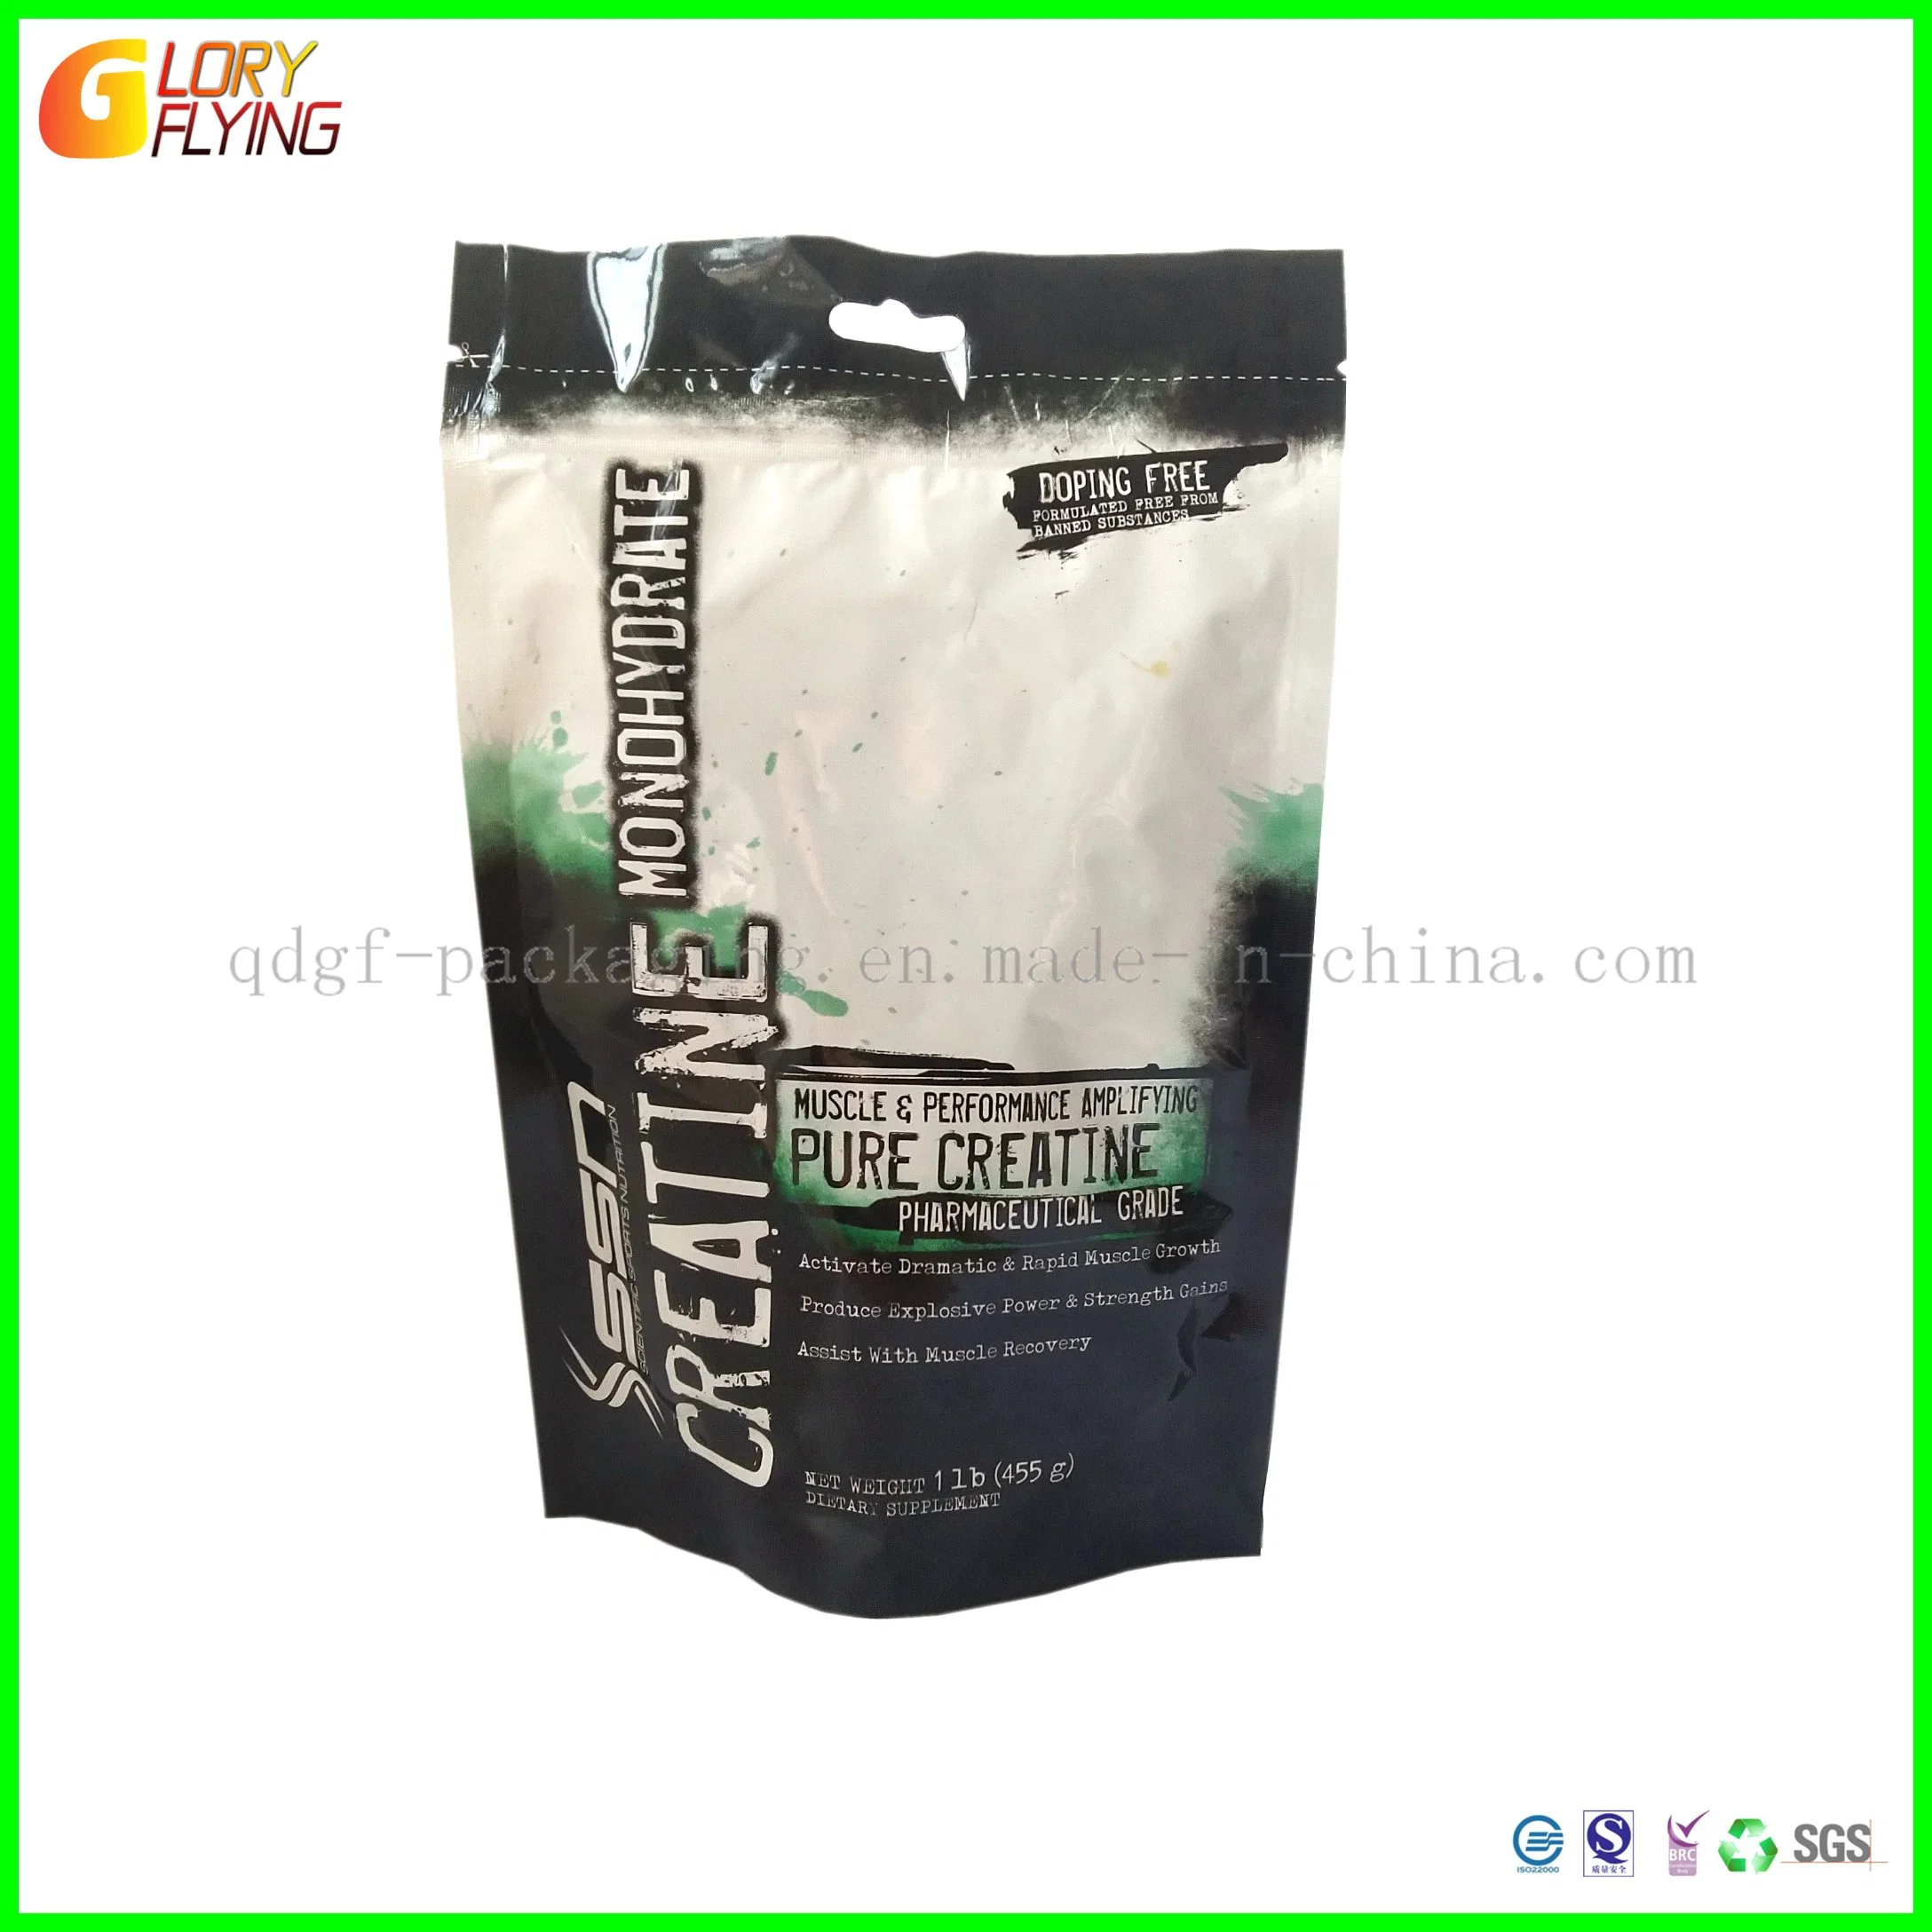 Coffee, Protein Powder, Tea Food, Including Self-Supporting, Zipper, Transparent Windows and Other Plastic Bags, According to Your Requirements Design Patterns.